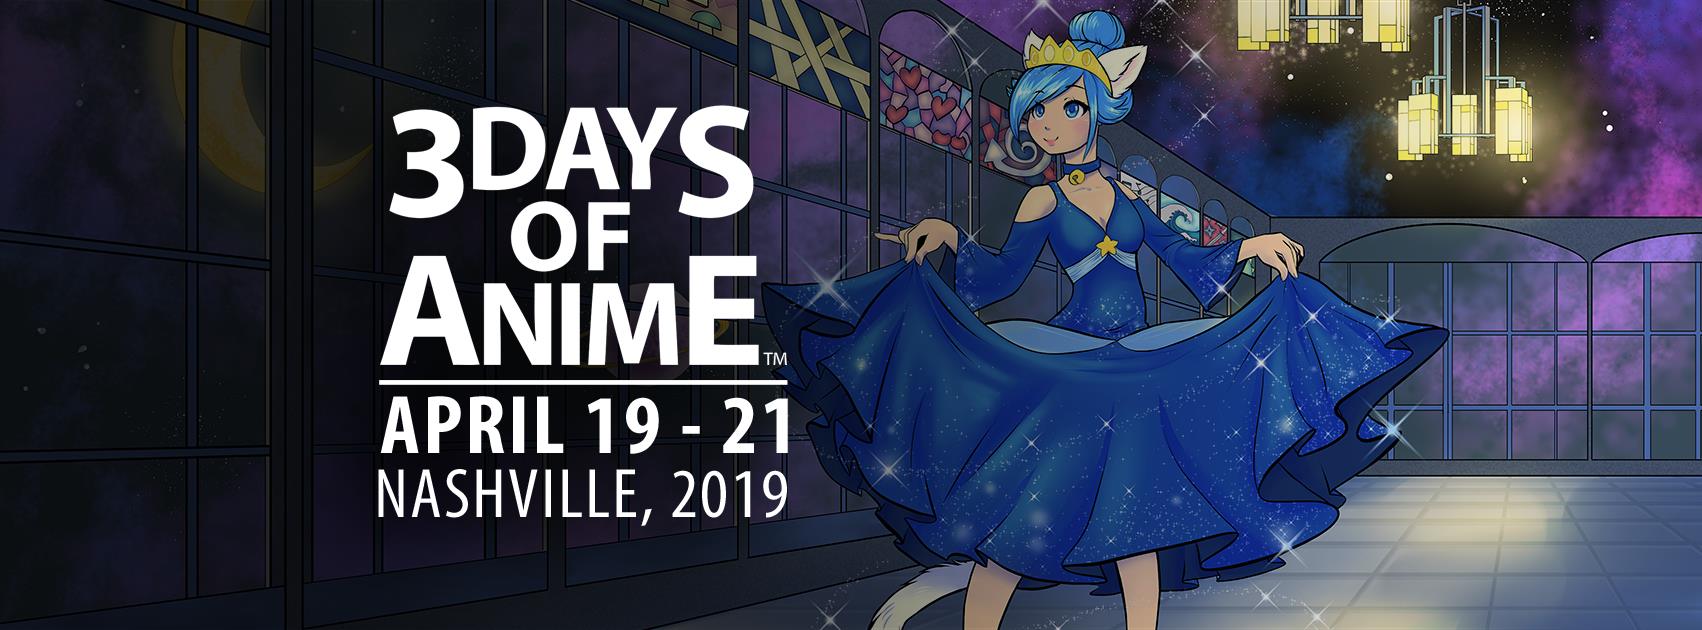 MTAC – Middle Tennessee Anime Convention 2019 | Comicon Adventures -  Review, Discover and Compare 100's of Comic Conventions